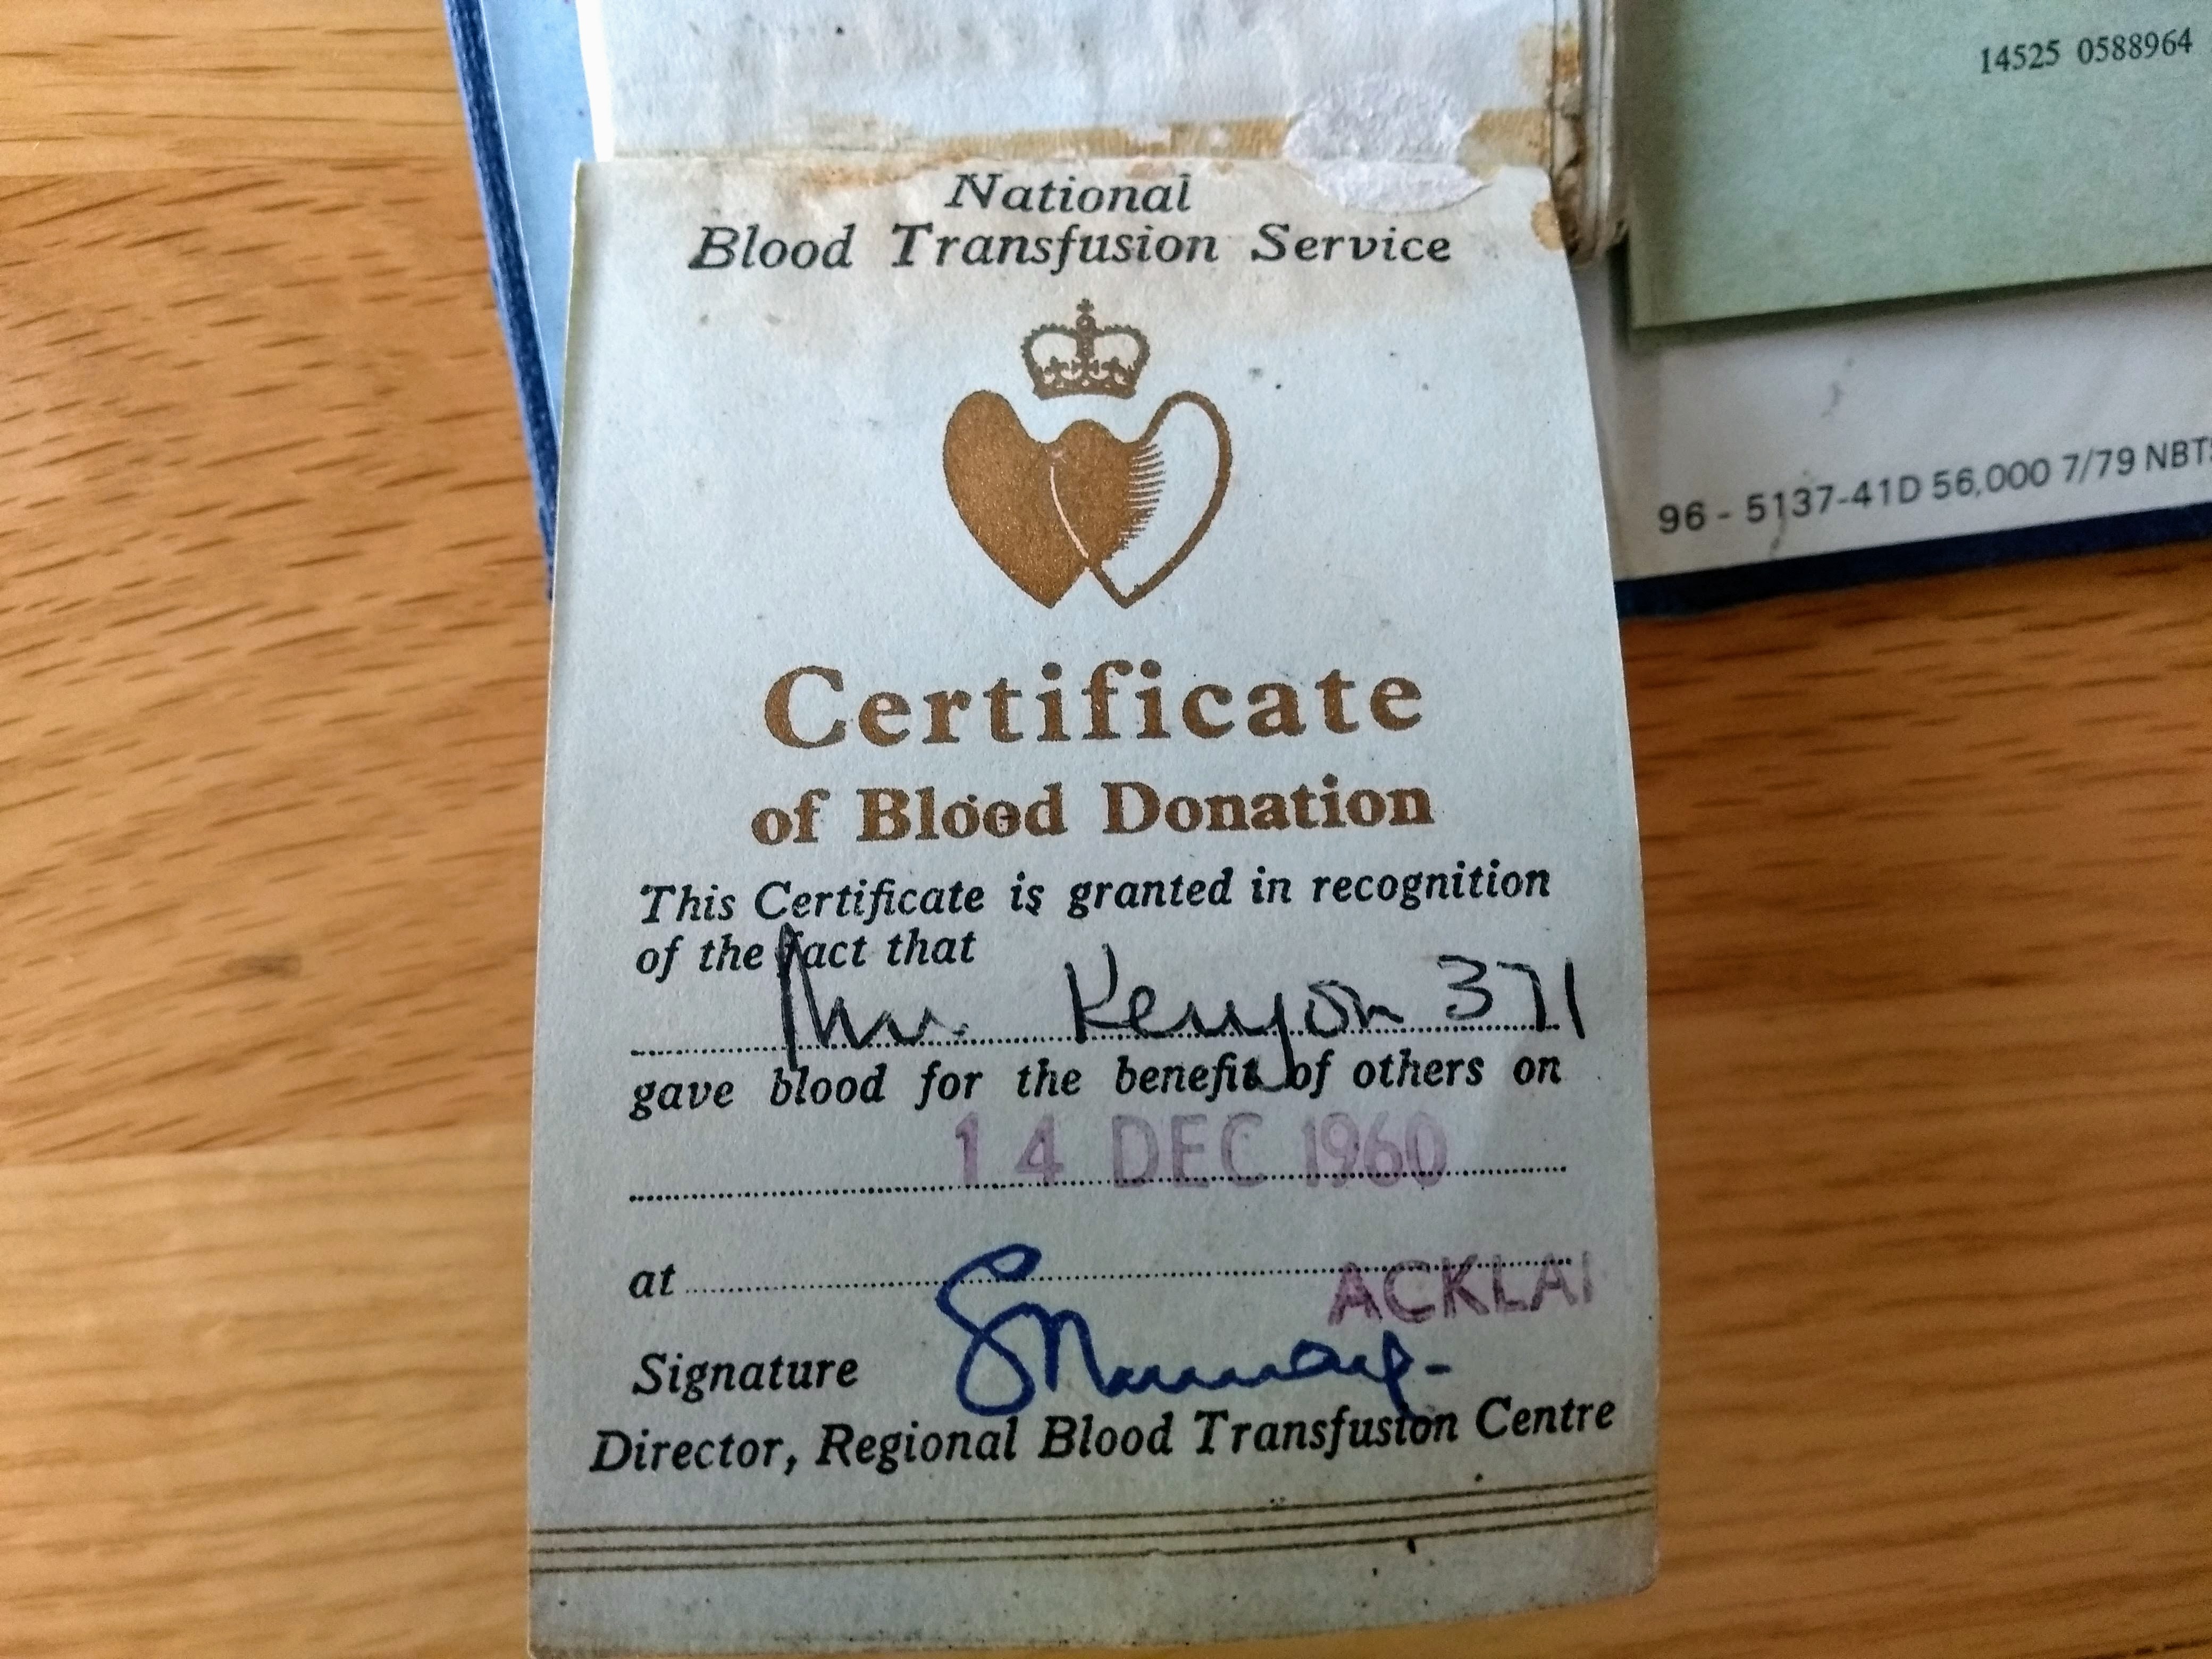 Chris' first donation certificate